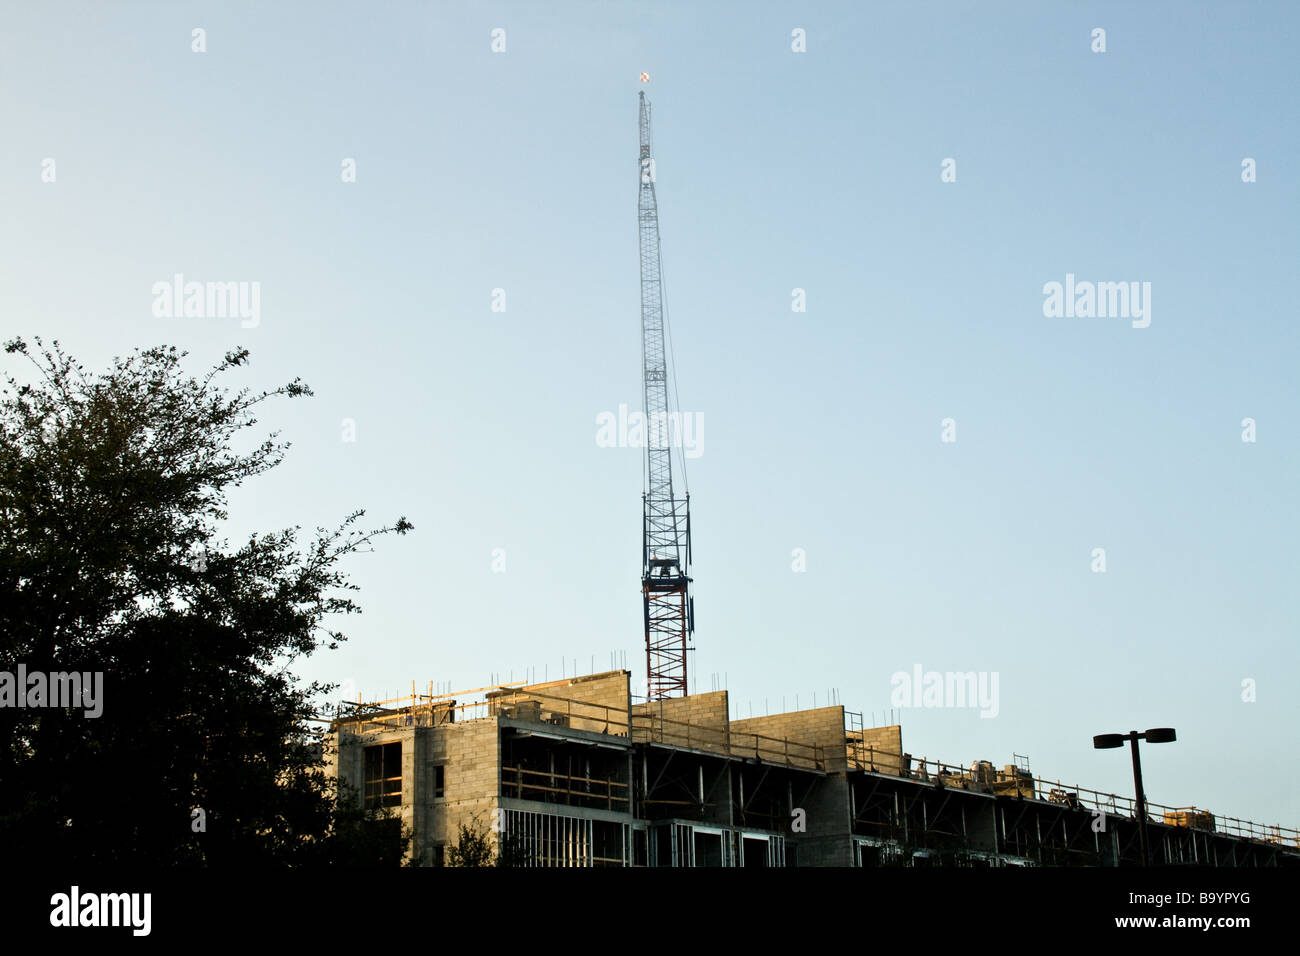 Large construction crane looming over a building on a clear day in Florida Stock Photo